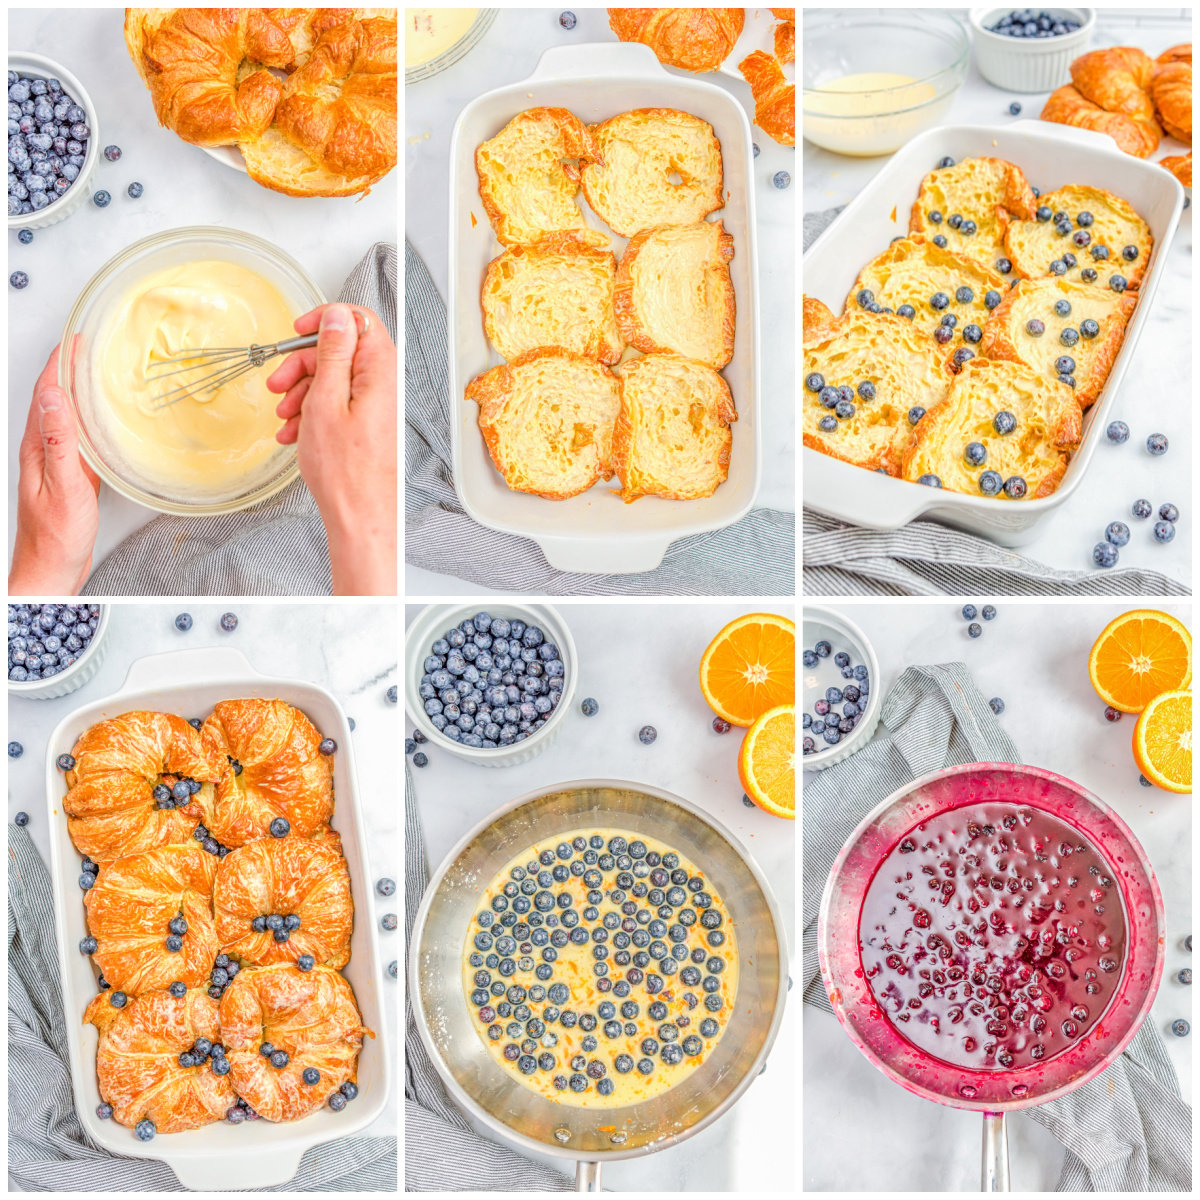 Step by step photos on how to make Blueberry Croissant French Toast